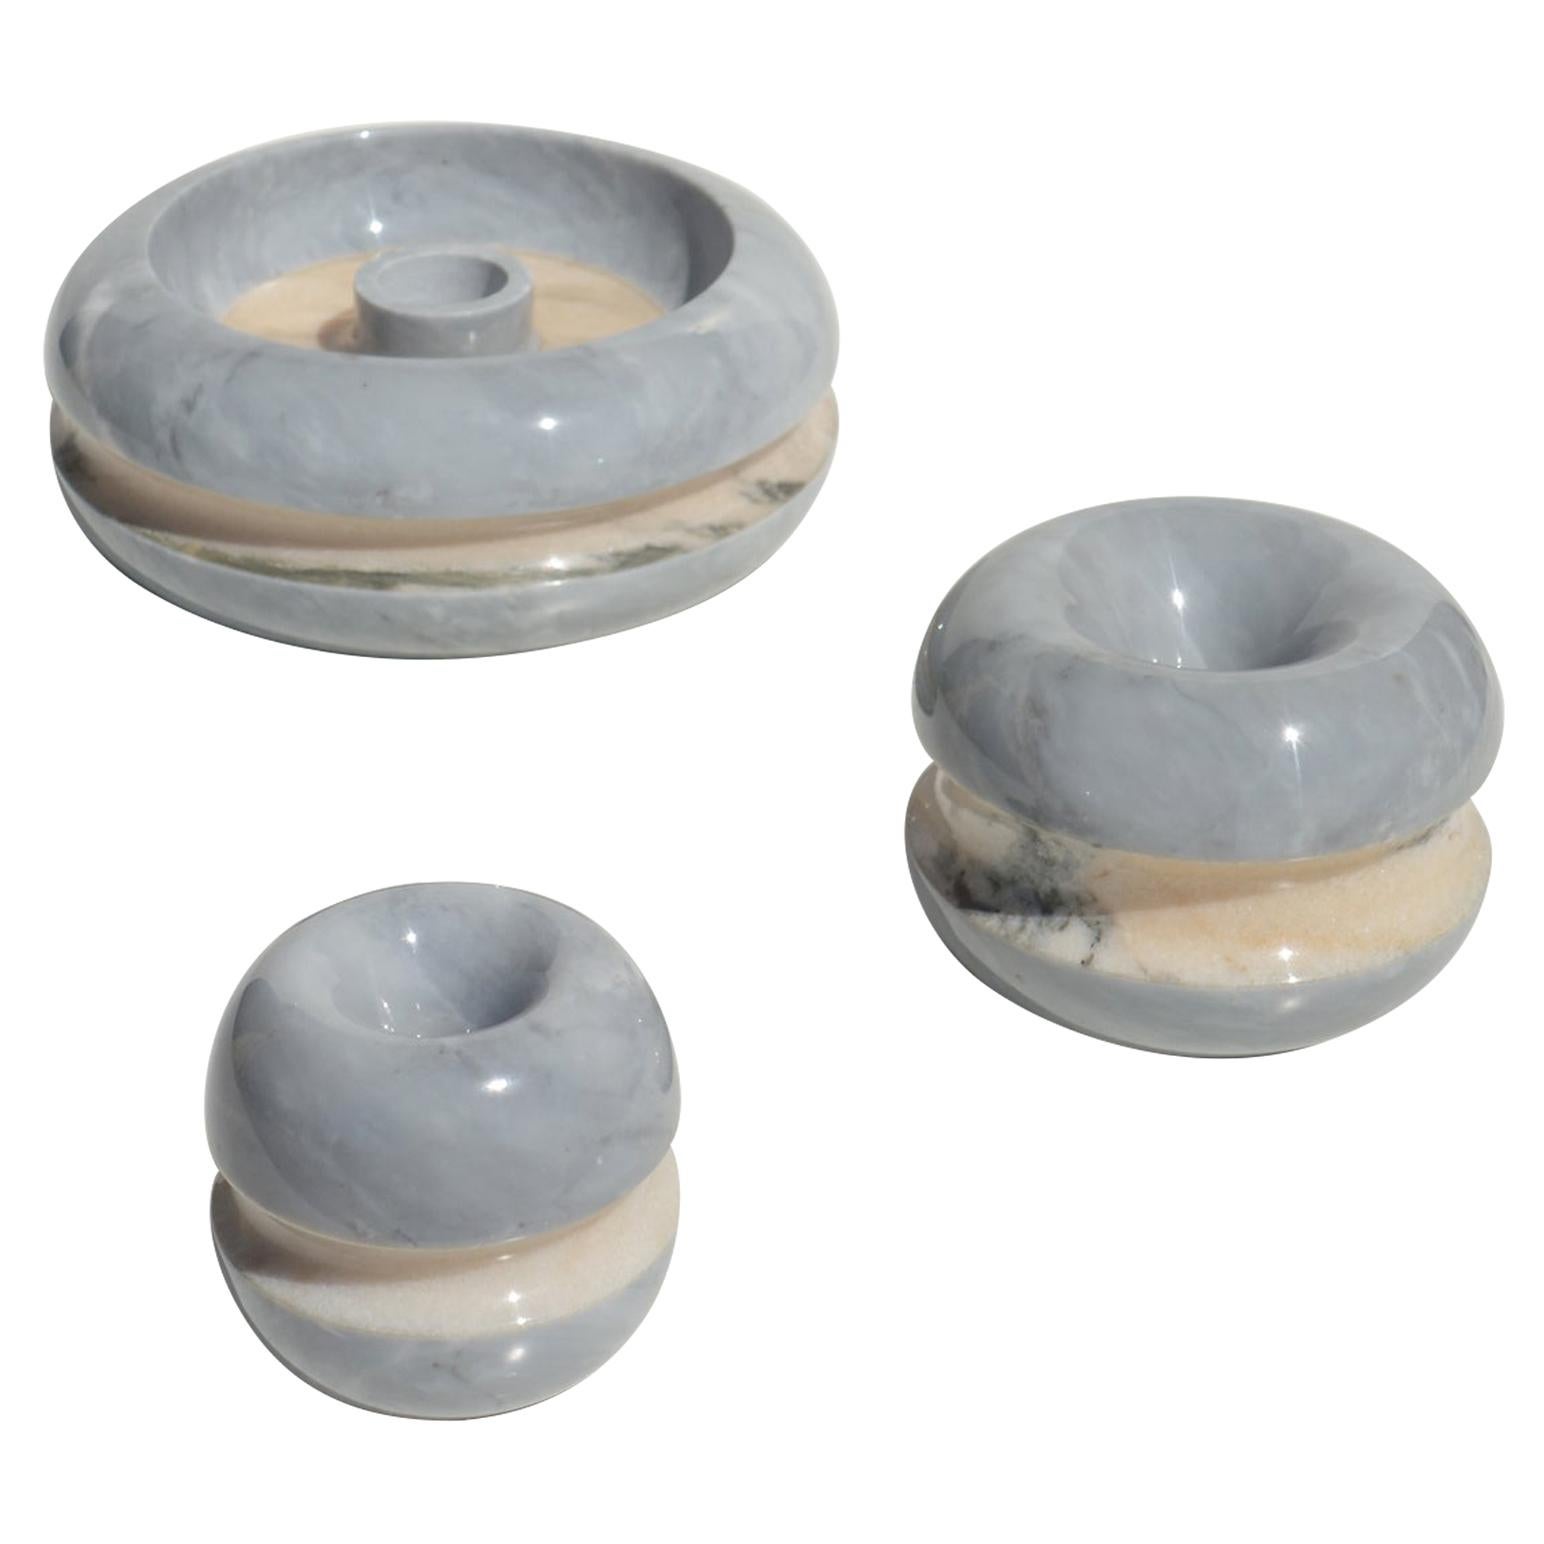 1970s by Massimo Vignelli for Casigliani Marble Smoking Ashtray, Set of 3 For Sale